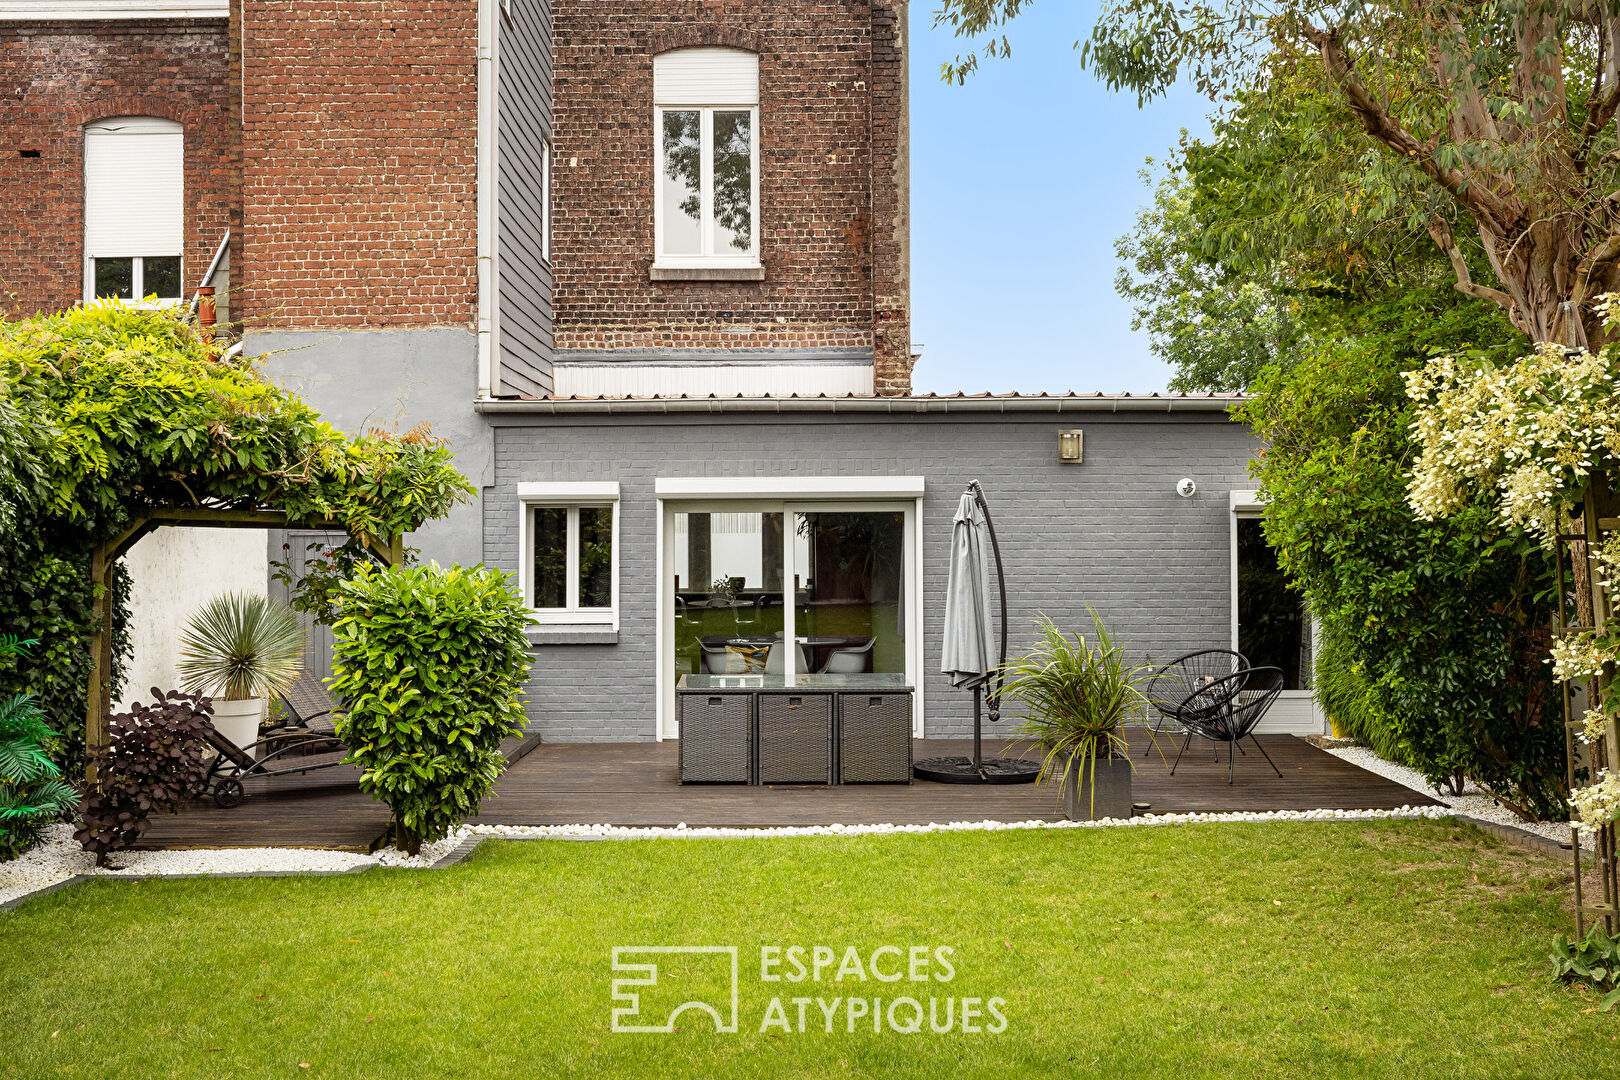 1930 house with contemporary extension and garden